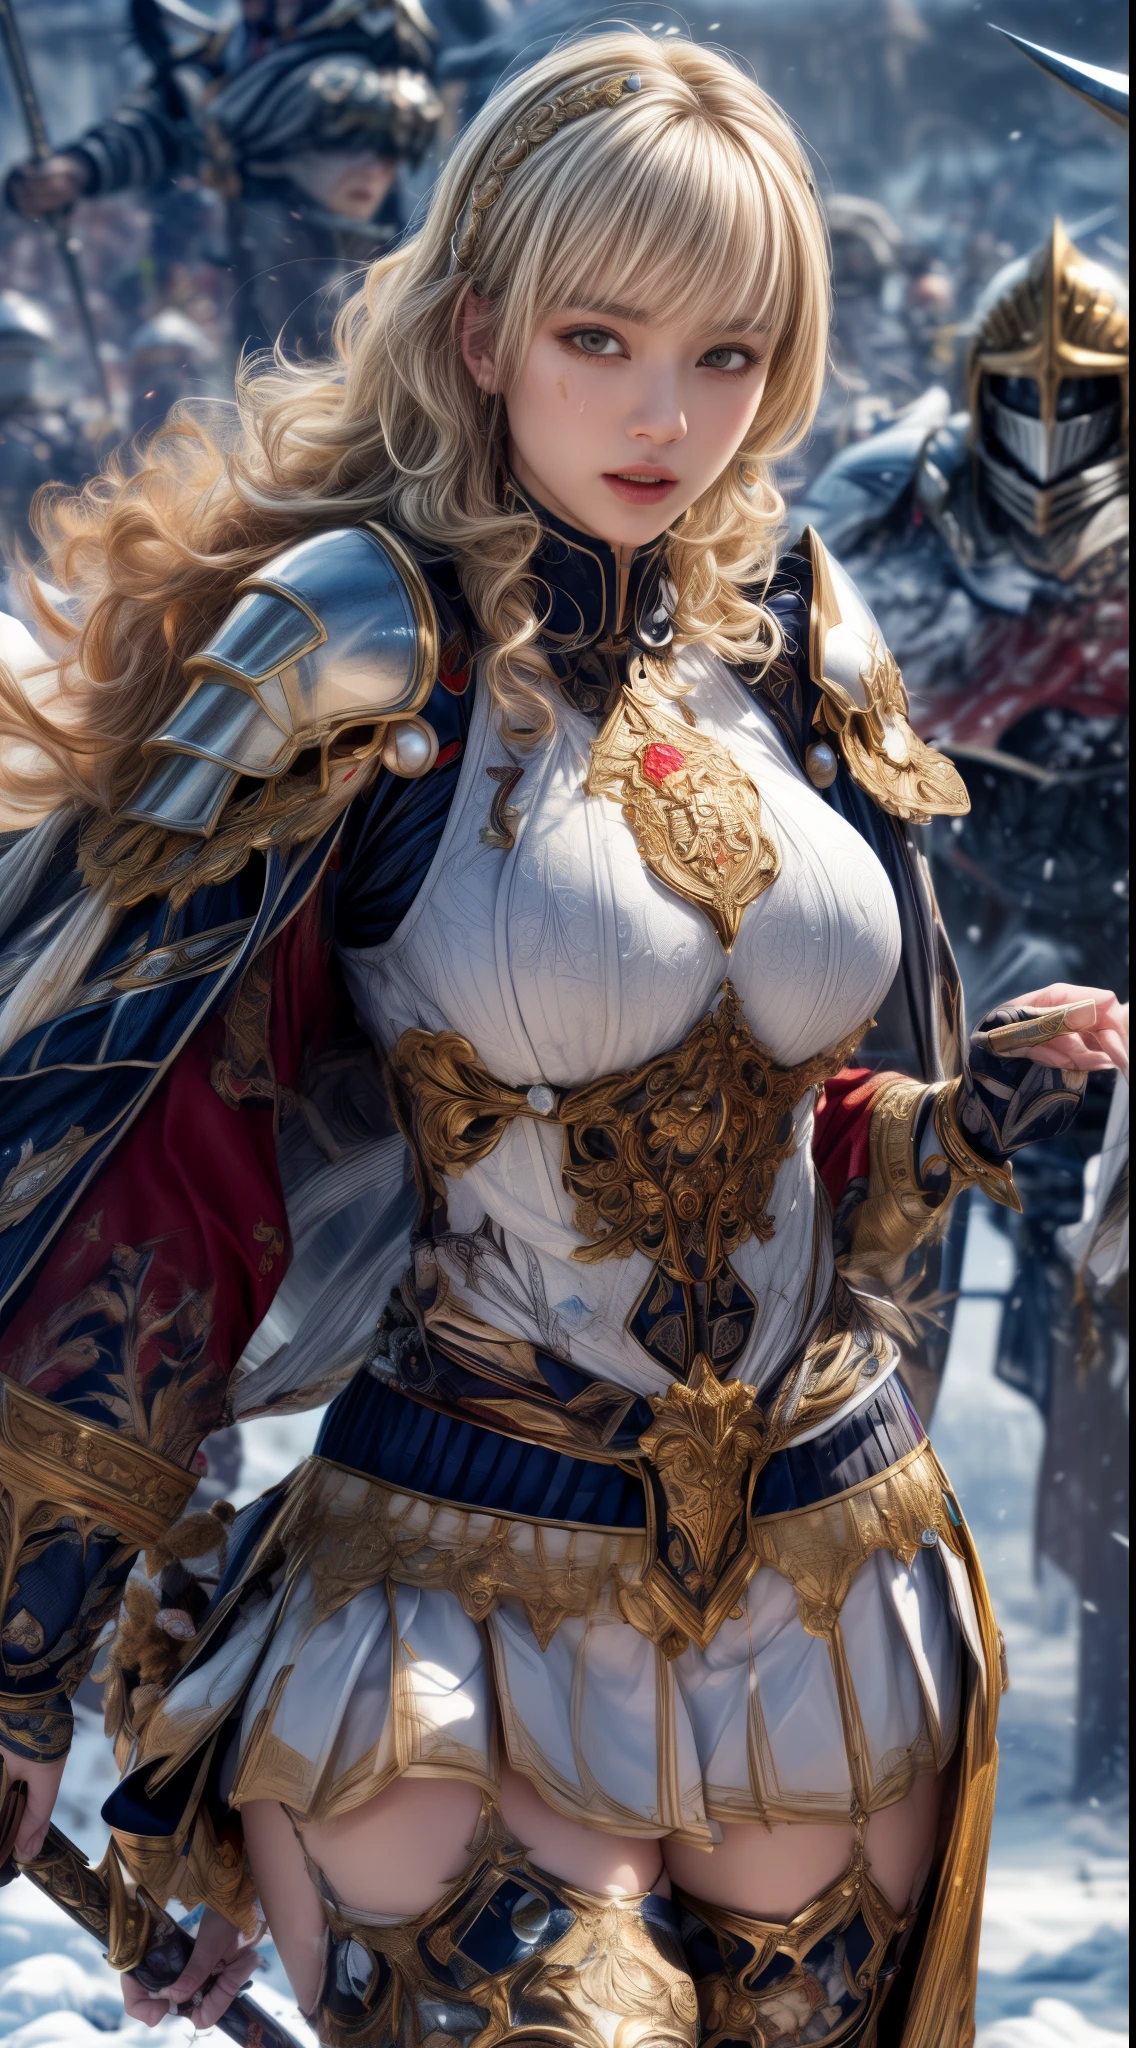 Very beautiful woman、Slender women、(Detailed face)、Realistic Skin、((holy knight)), ((Pearl White Armor))、((((Black armor with very fine and intricate decoration:1.1))))、((Delicate photo))，(Girl Astepeace RAW Photo Details:1.25), (highest quality:1.6), (超A high resolution:1.5), (Realistic:1.75), 8K resolution, Canon EOS R5, 50mm, Absurd, Ultra-detailed,Cinema Lighting,((battlefield))、((battle))、(((White skirt with embellishments)))、Thigh-high socks、Shin Guards、((Blonde))、((Curly Hair))、((Drill Hair))、((Wavy short hair with bangs,))、Get six-pack、Cape、Beautiful Armor、(((Has a huge weapon)))、(In combat)、The wind is blowing、((Symmetrical Armor))、((((Blizzard))))、(((Leading a large group of knights:1.2)))、Banner、Armor with a snow and ice motif、(((Battle Scene)))、((nsfw:1.1))